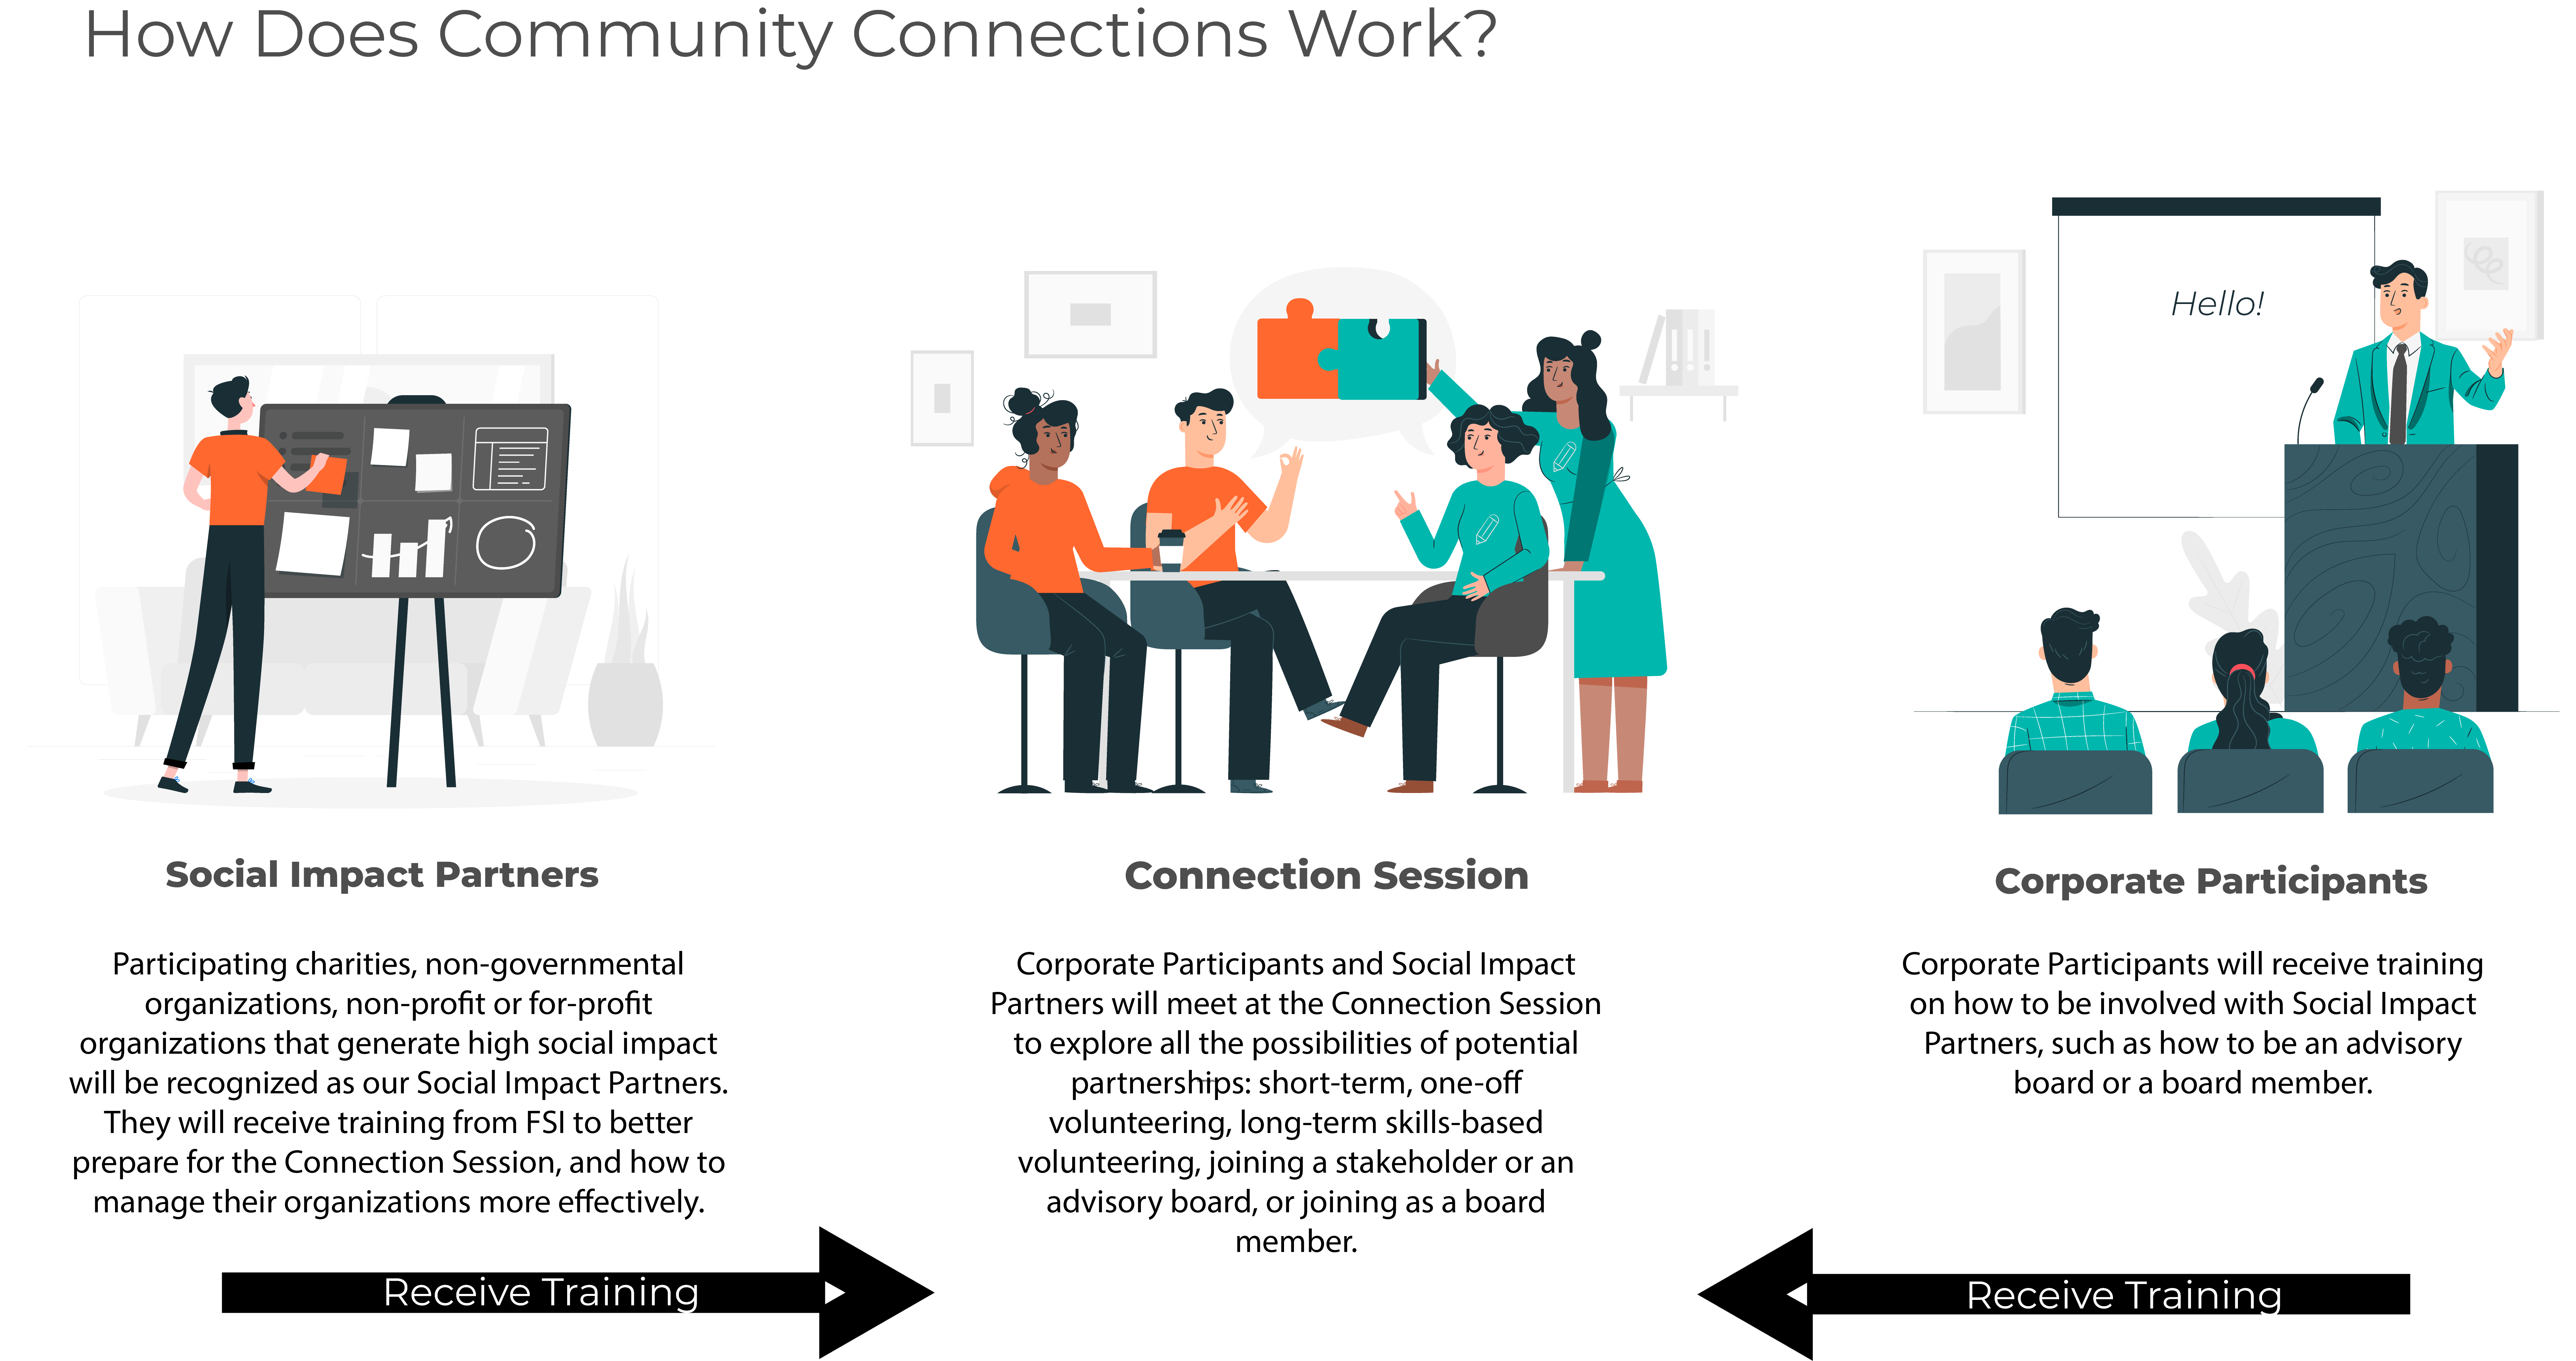 How does community connections work?